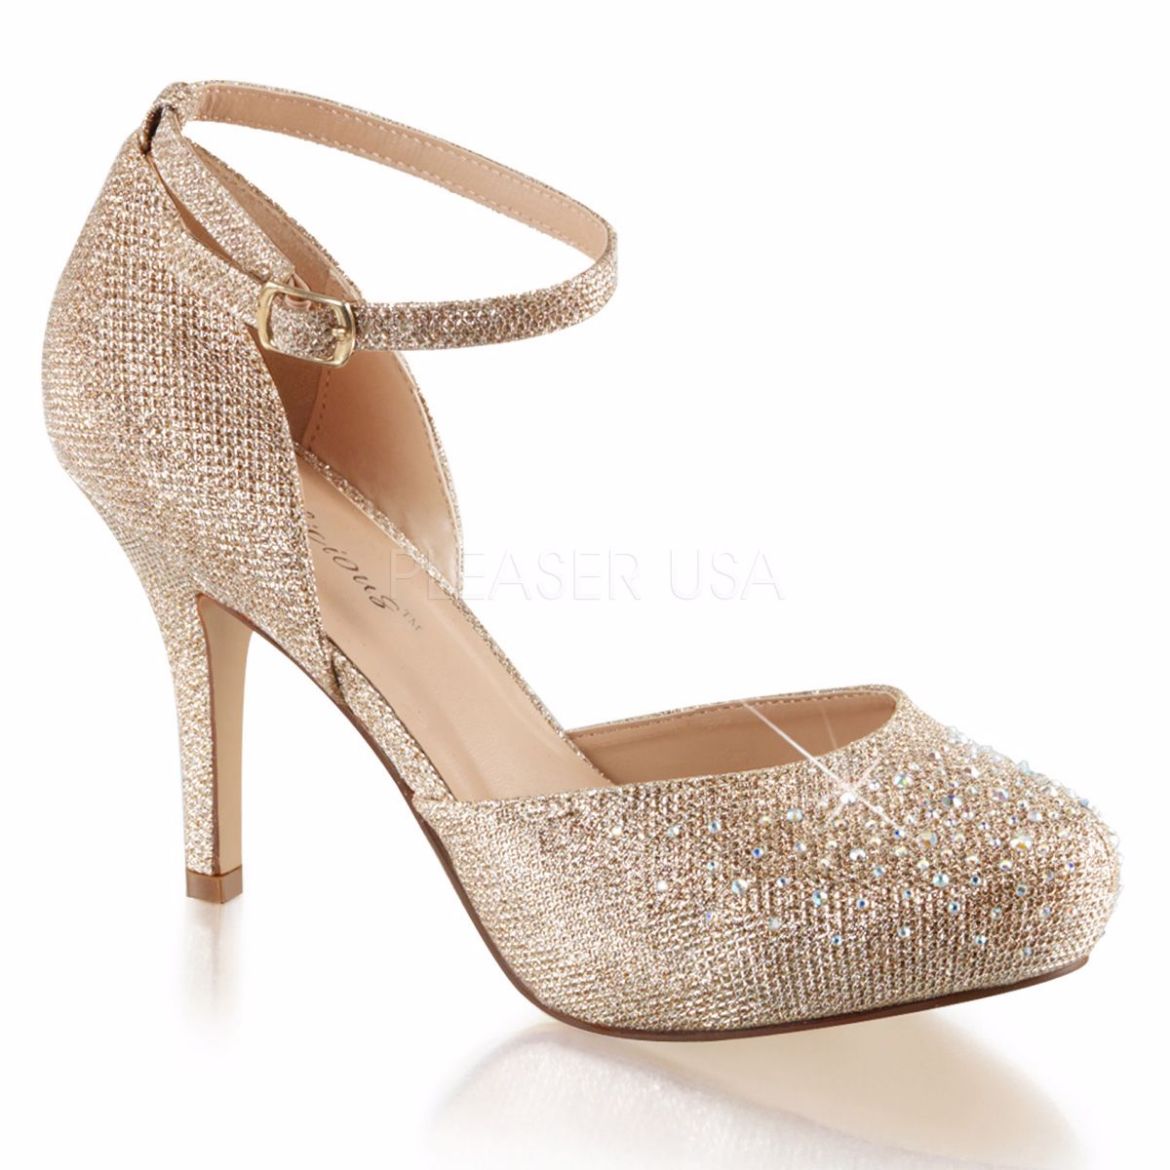 Product image of Fabulicious COVET-03 Nude Glitter Mesh Fabric 3 1/2 inch (8.9 cm) Heel 1/2 inch (1.3 cm) Hidden Platform Ankle Strap D'orsay Pump Court Pump Shoes